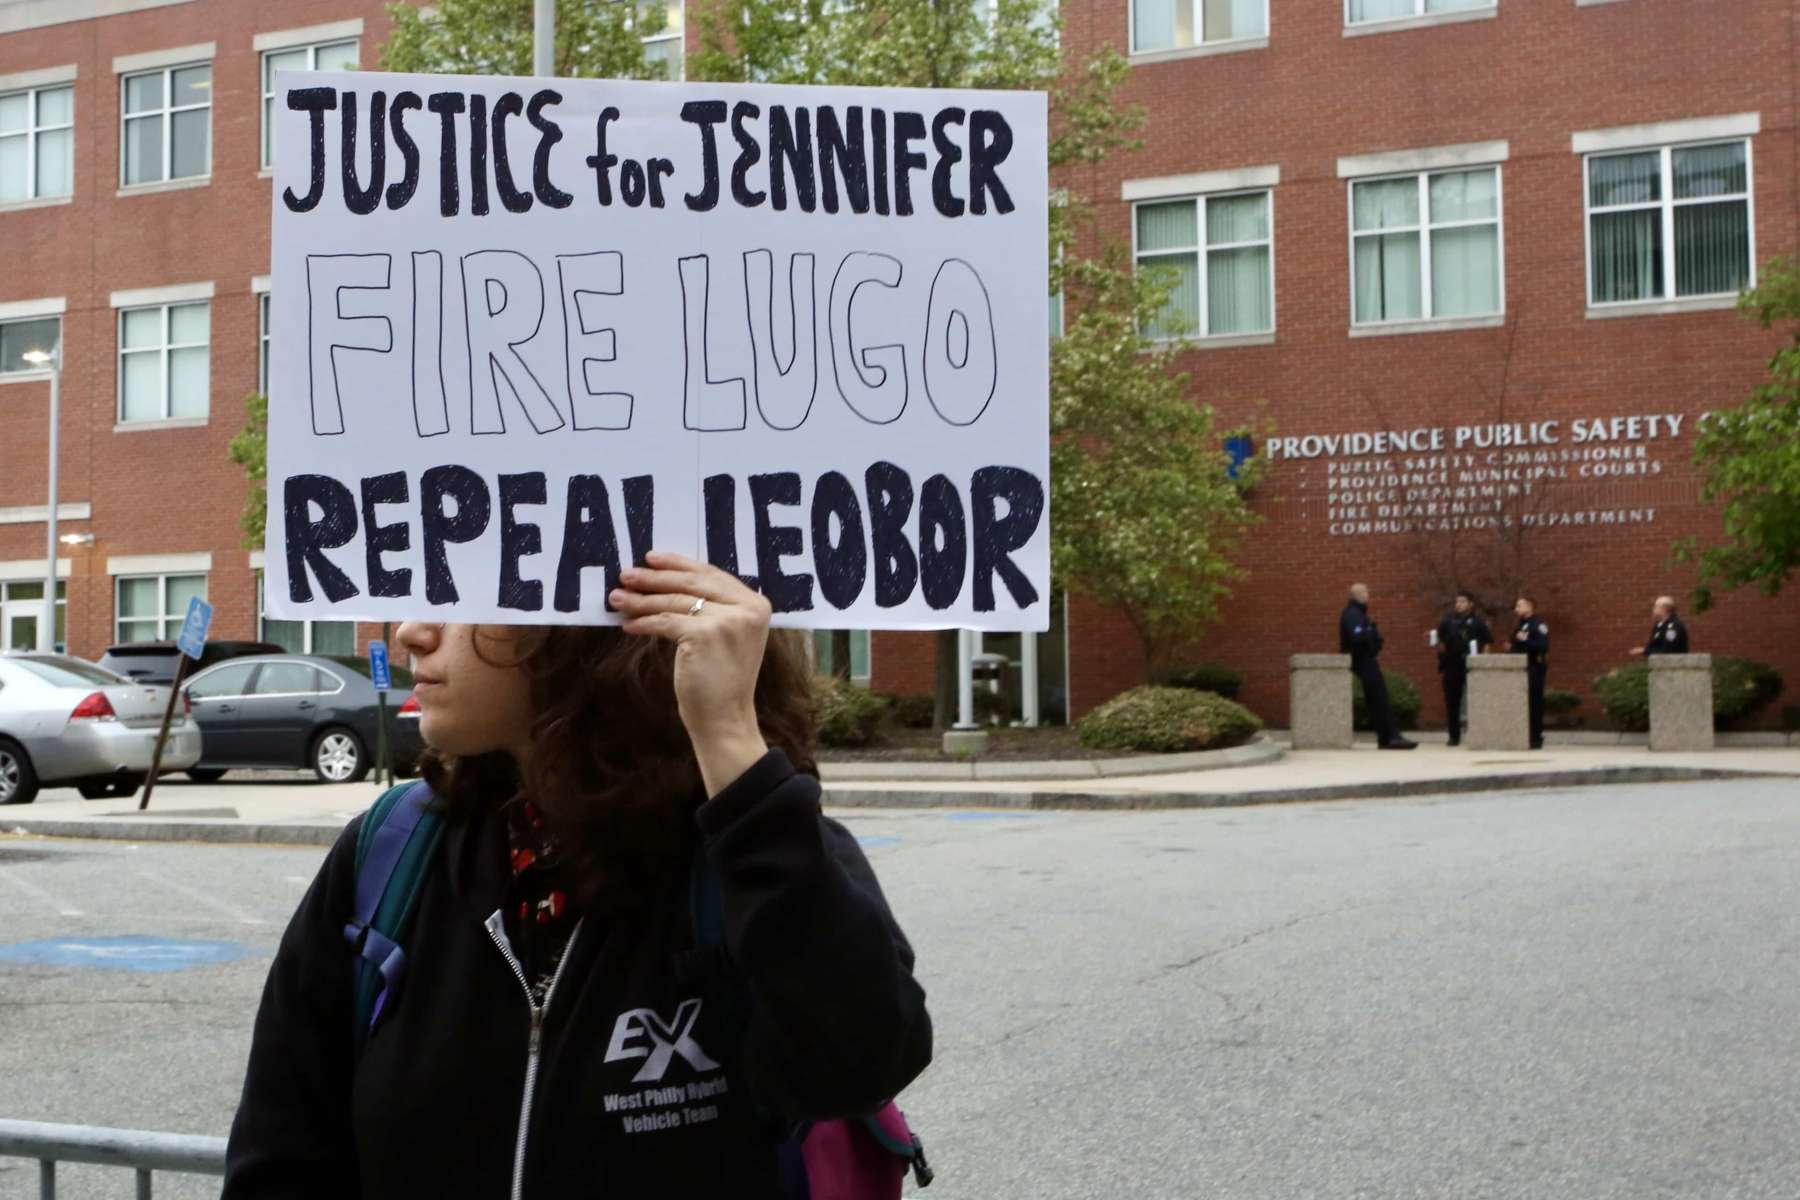 Black Lives Matter RI PAC Protests Against Police Officer’s Reinstatement and LEOBoR